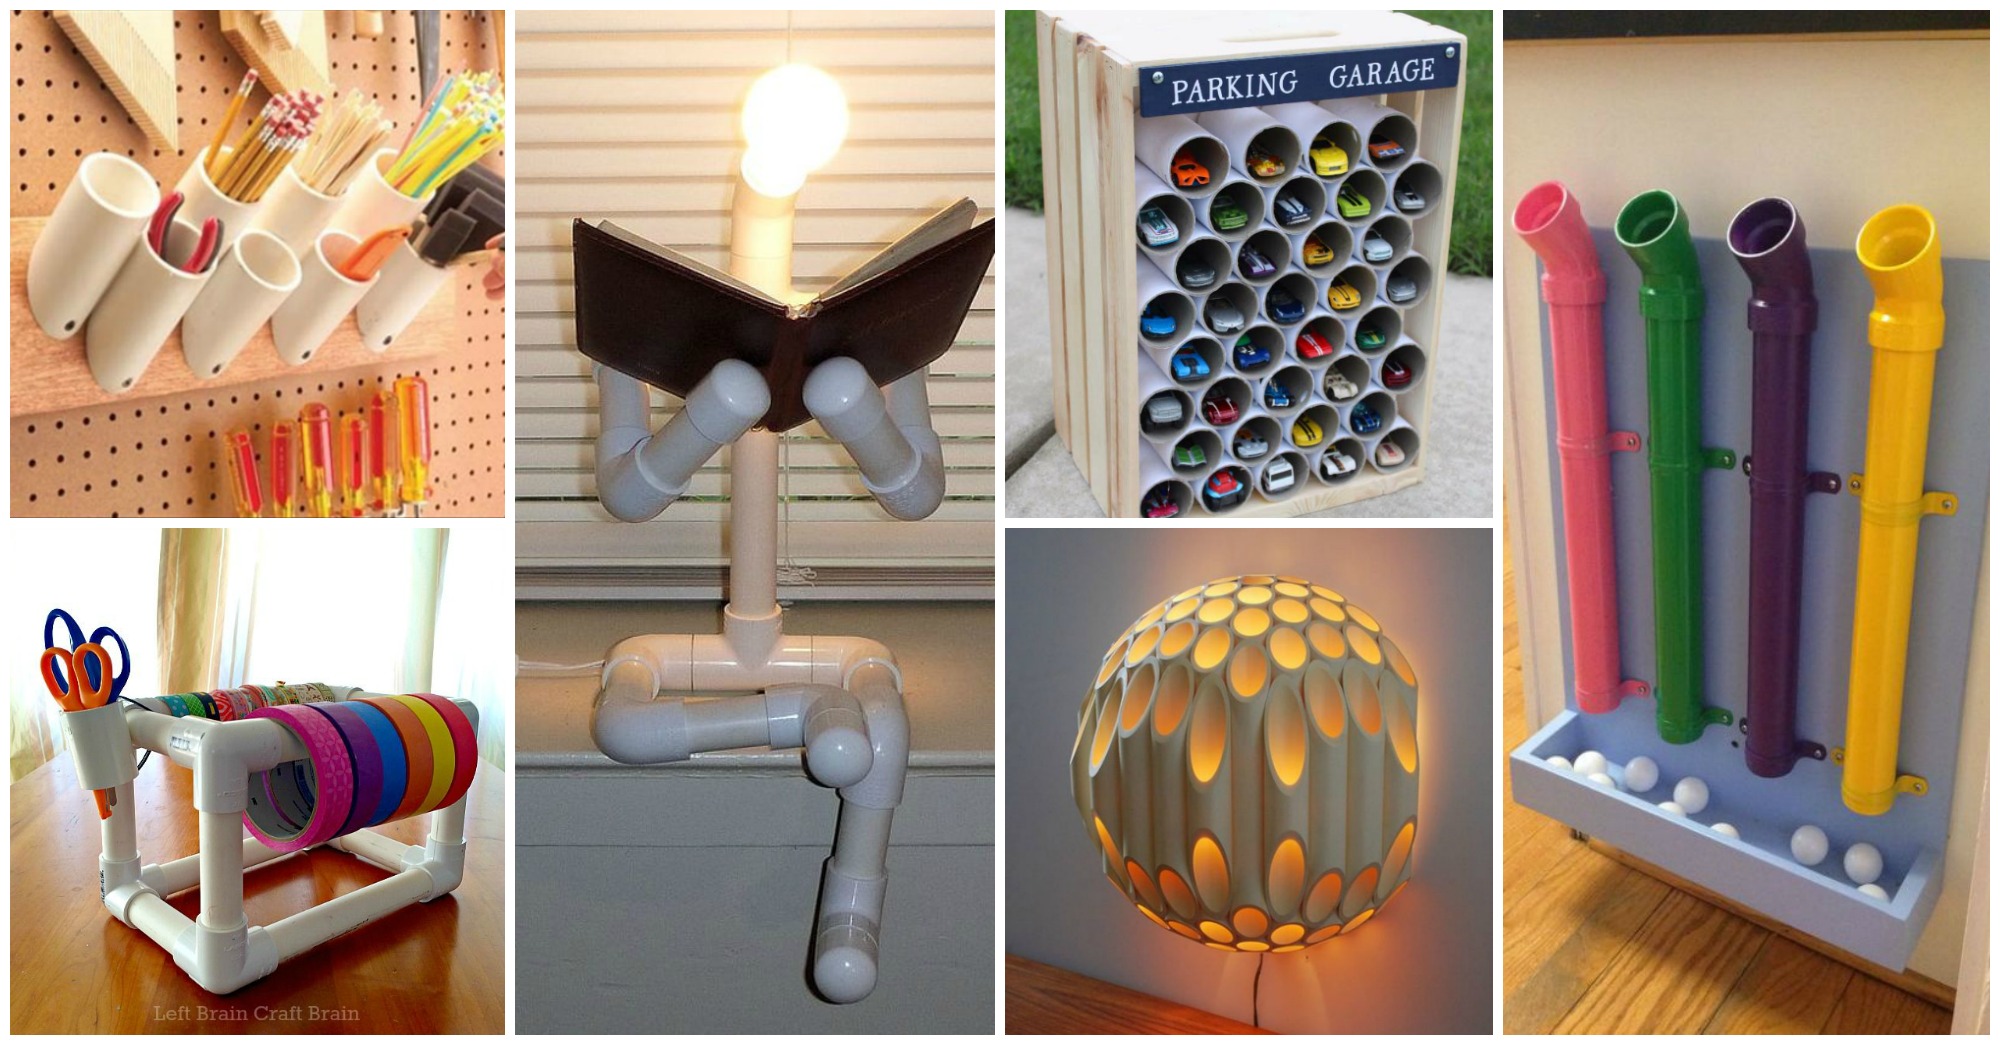 DIY PVC Pipes As Bright And Creative Solutions For Your Home.